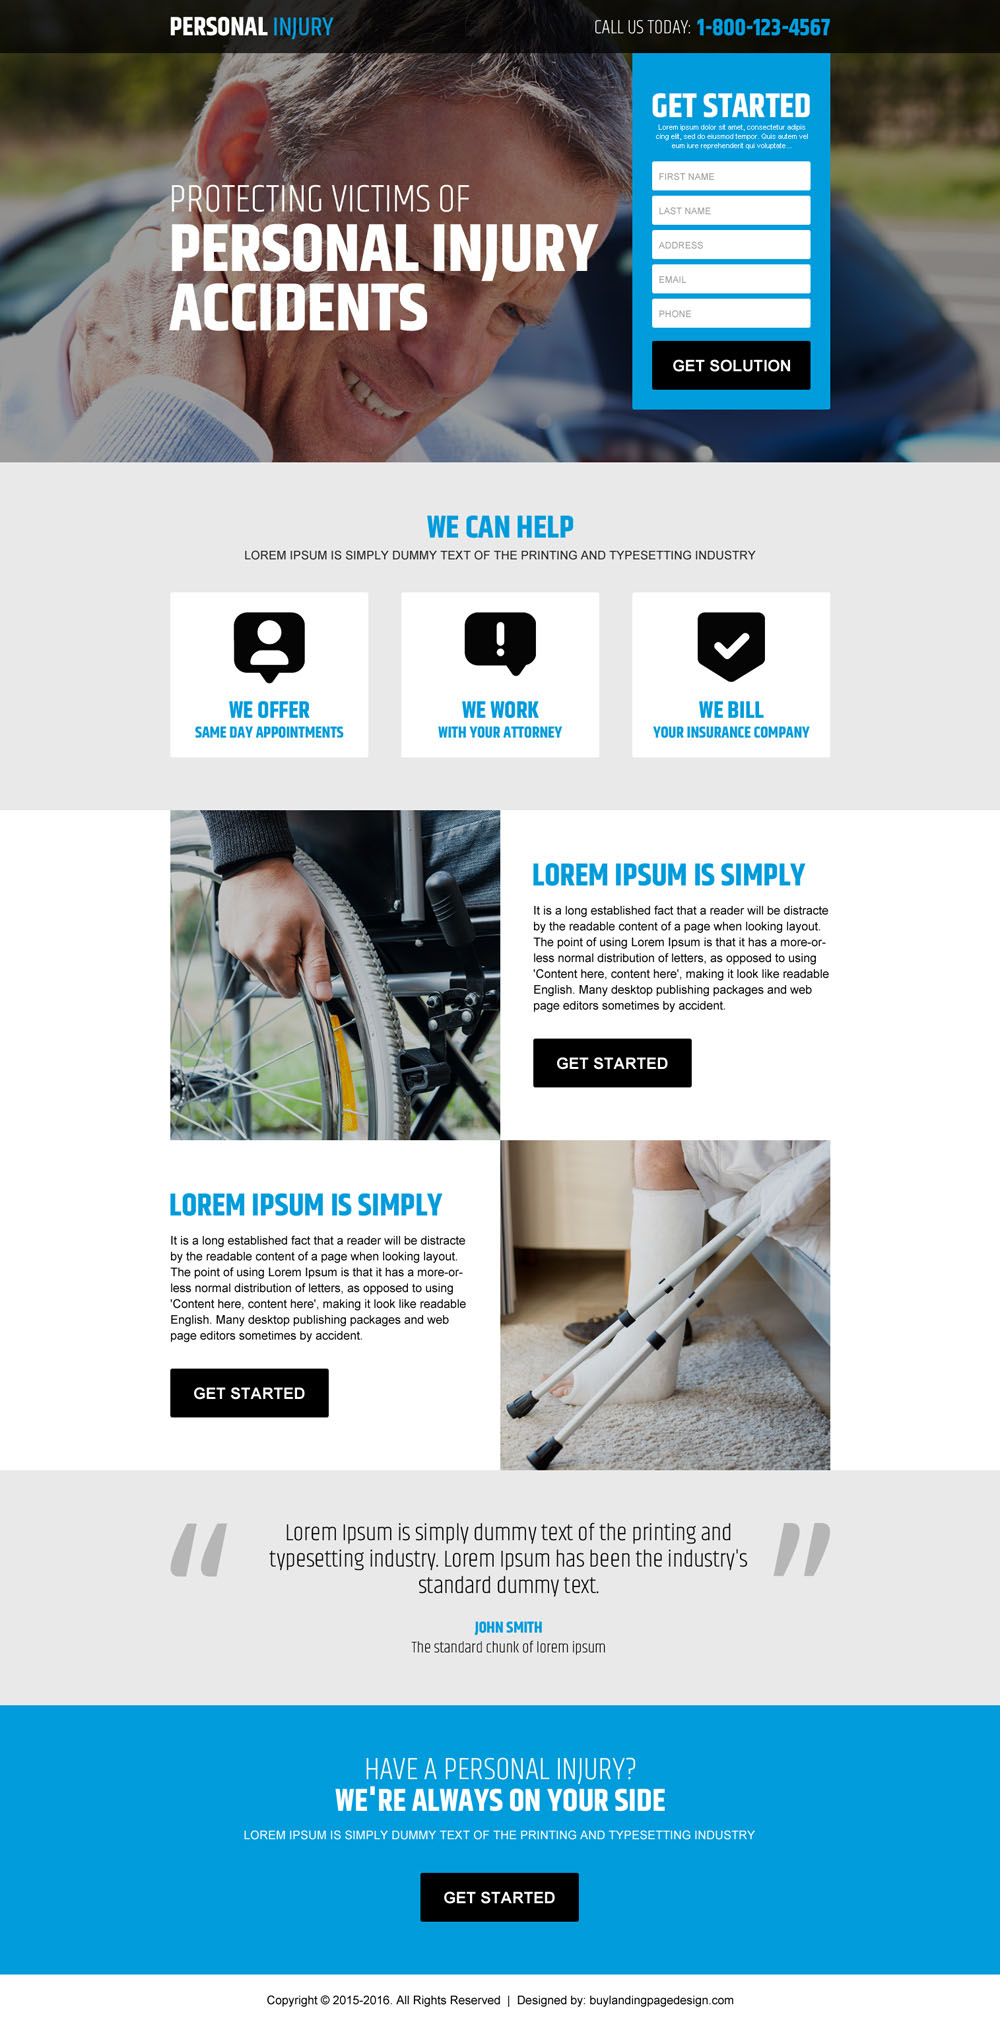 personal-injury-accidents-claim-lead-capture-landing-page-design-003